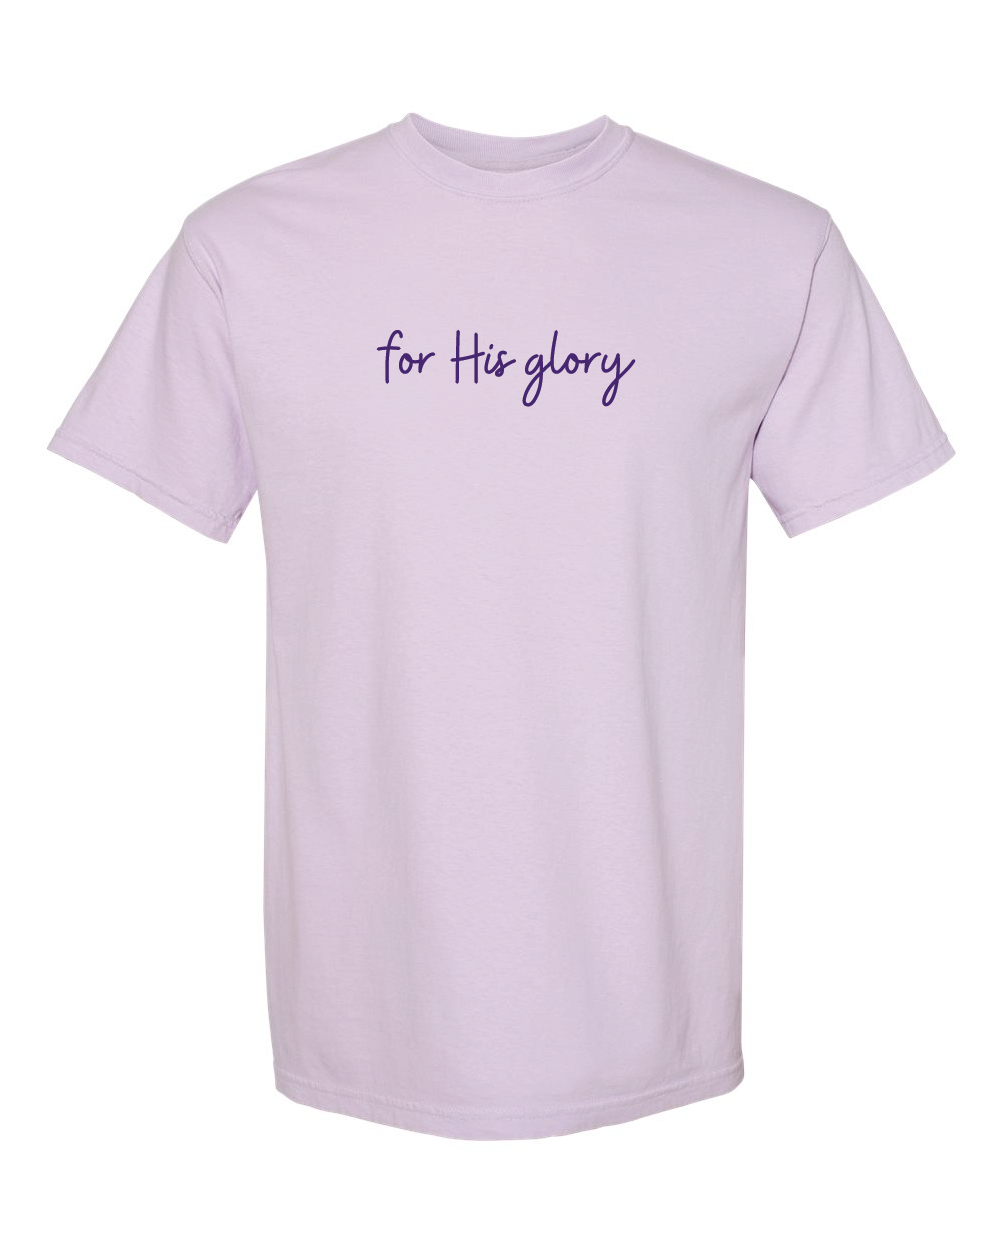 CUSTOMS - FOR HIS GLORY TEES